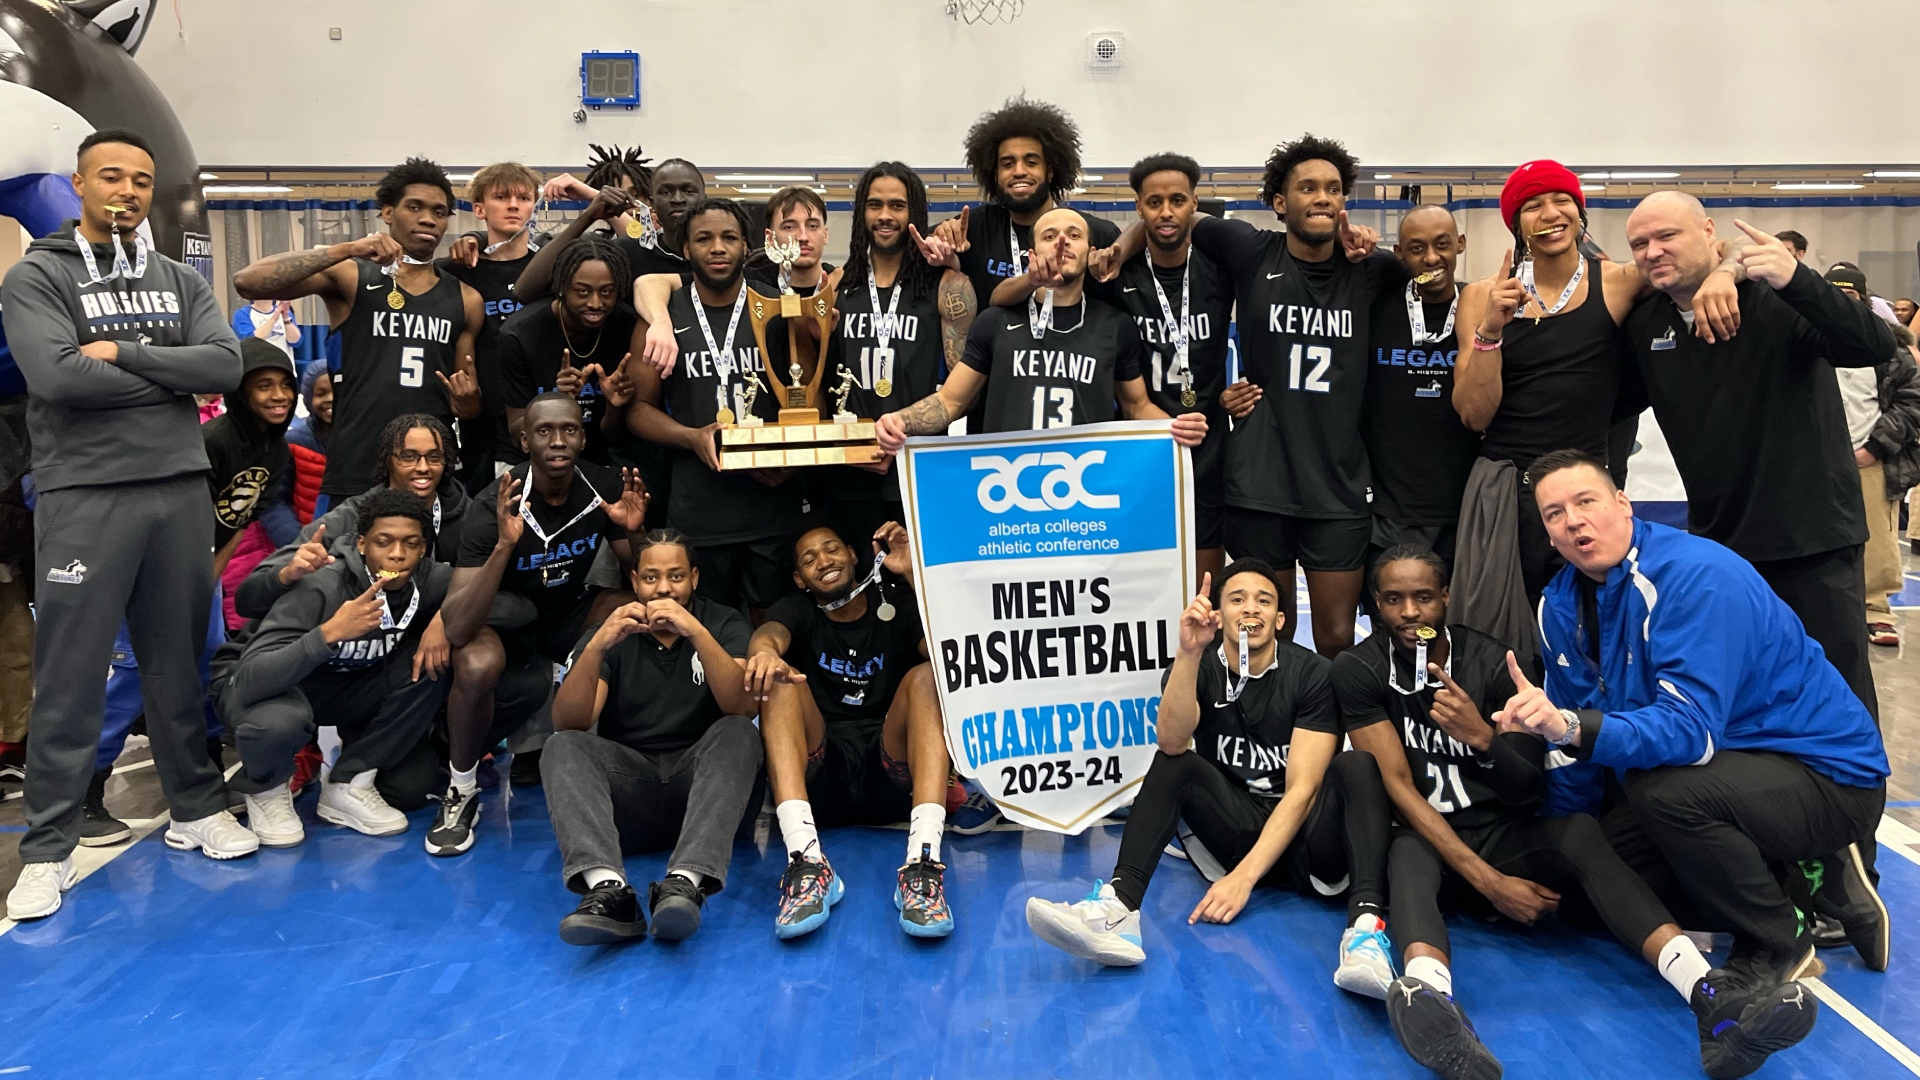 Huskies crowned champions of ACAC Men's Basketball on home court